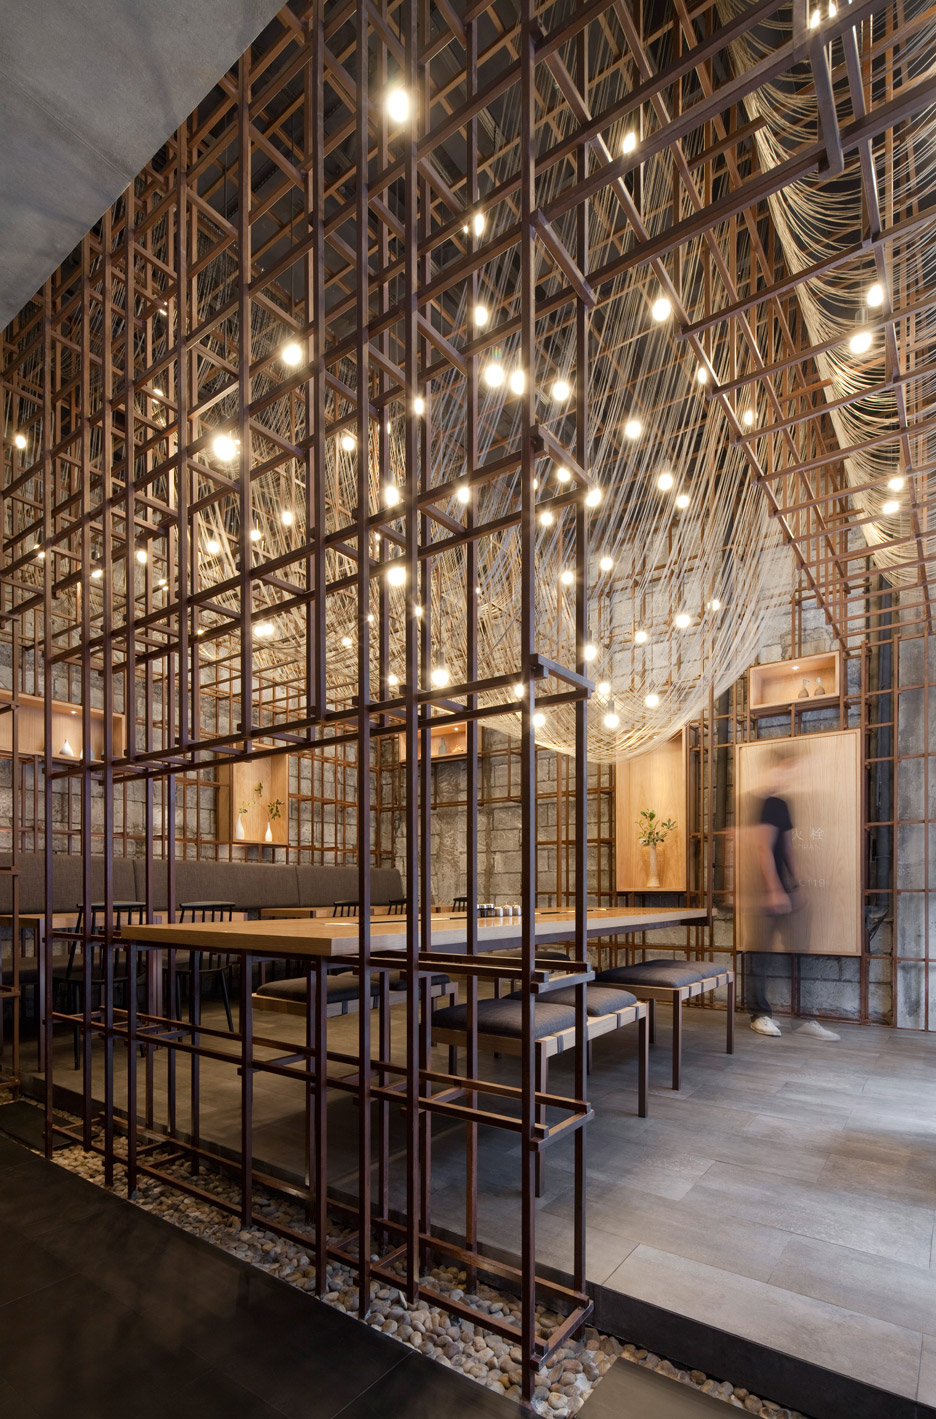 Lukstudio Suspends Metal Wires To Look Like Drying Noodles At Chinese Restaurant